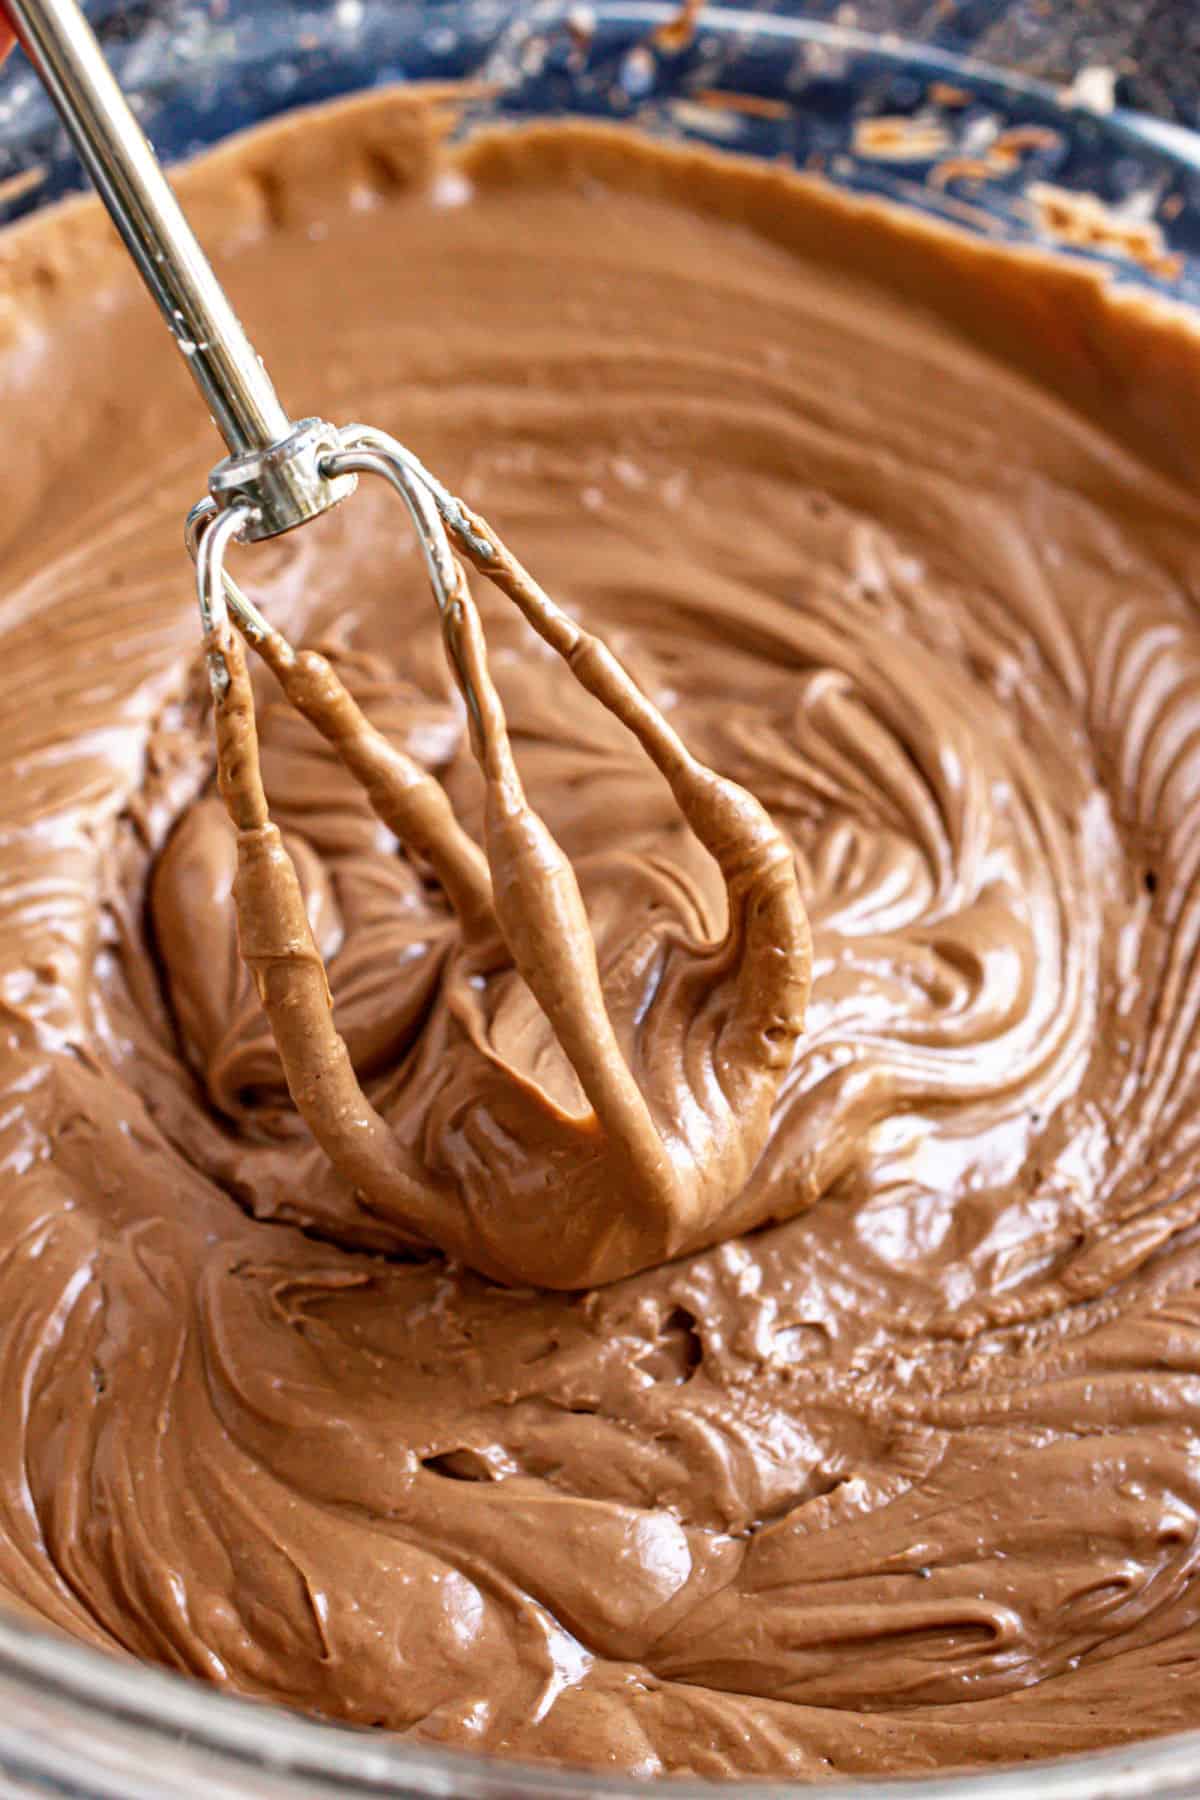 Smooth and creamy chocolate frosting in a glass bowl with a beater.